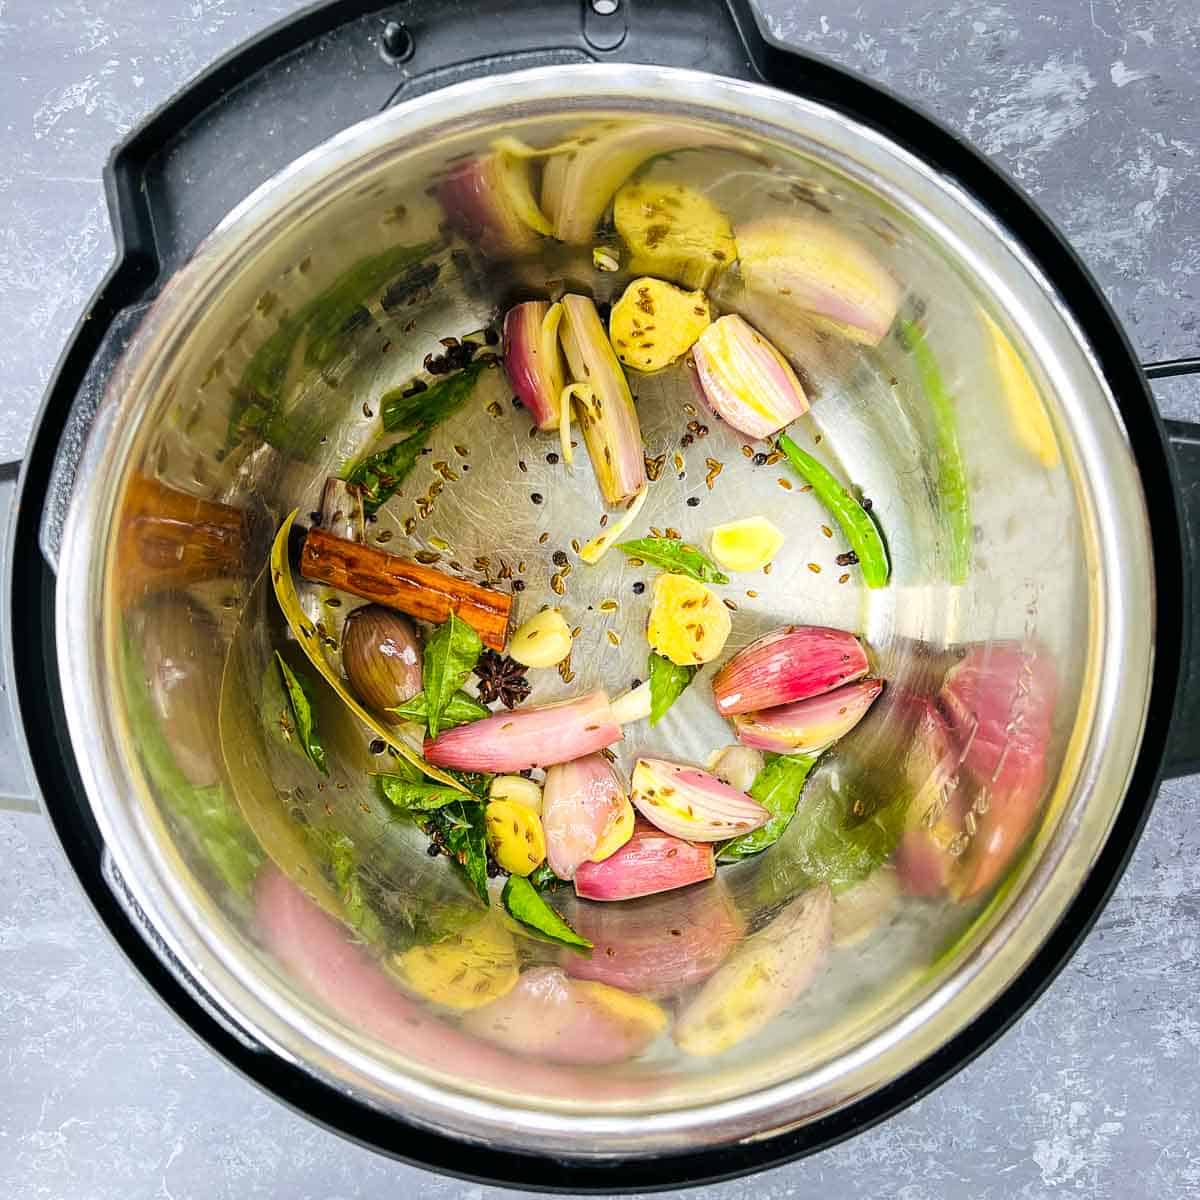 Step showing the sauted spices and aromatics in Instant Pot.